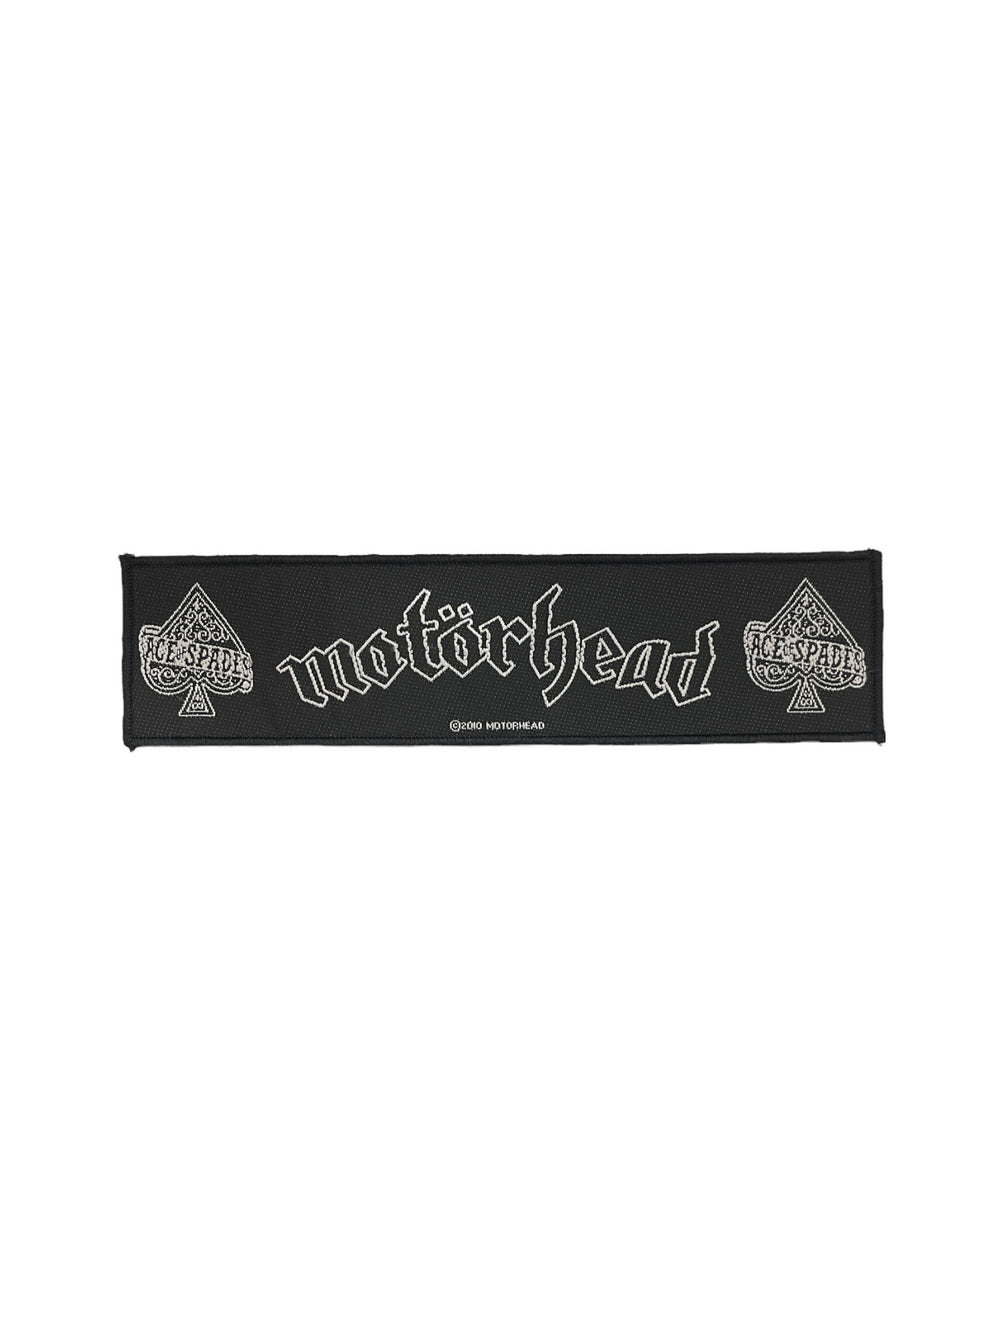 Motorhead Super Strip Patch: Ace Of Spades Official Woven Patch Brand New